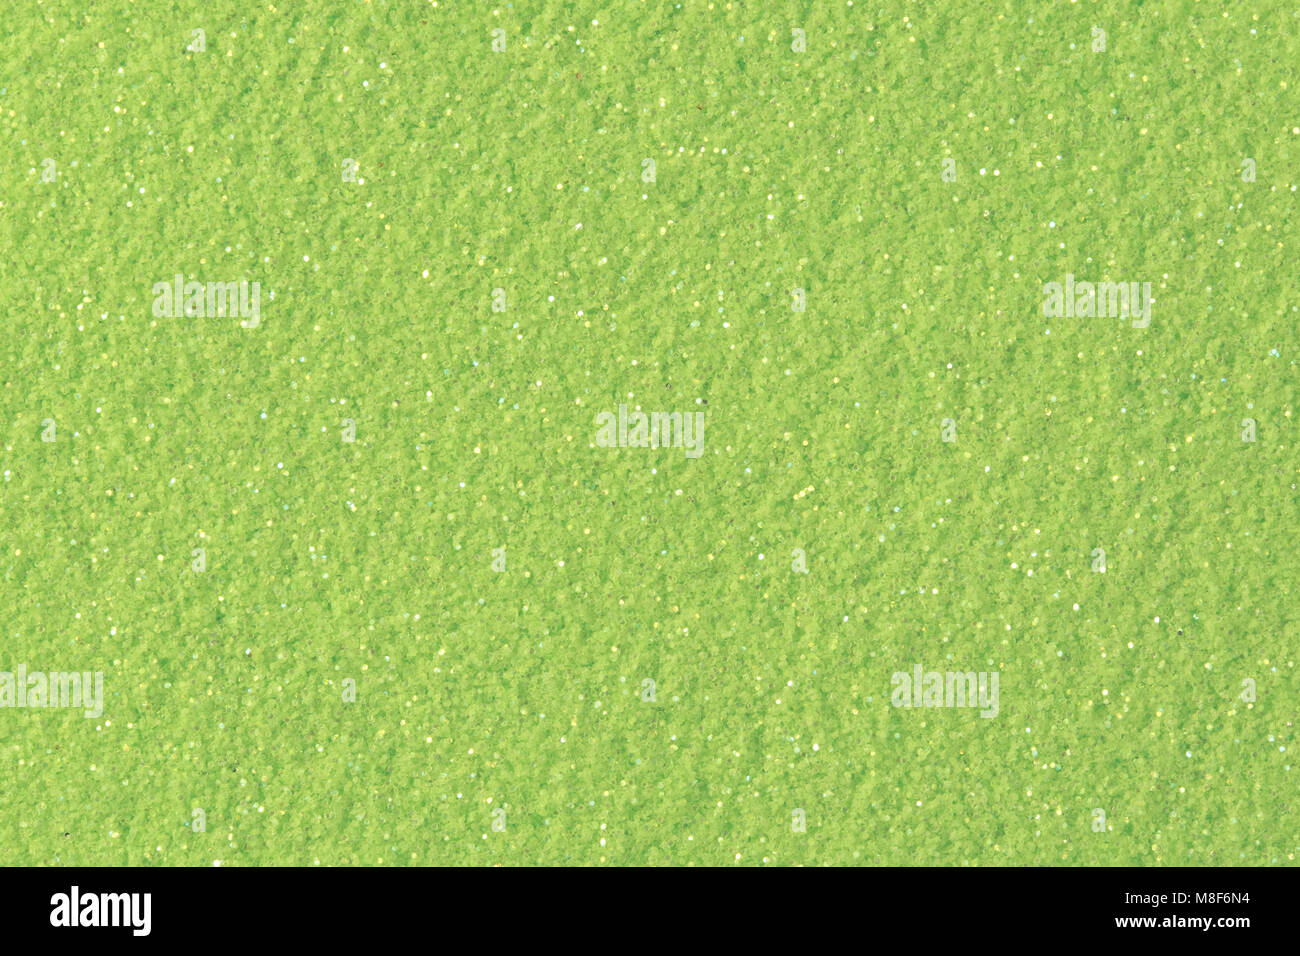 Lime glitter background.  Low contrast photo. Stock Photo